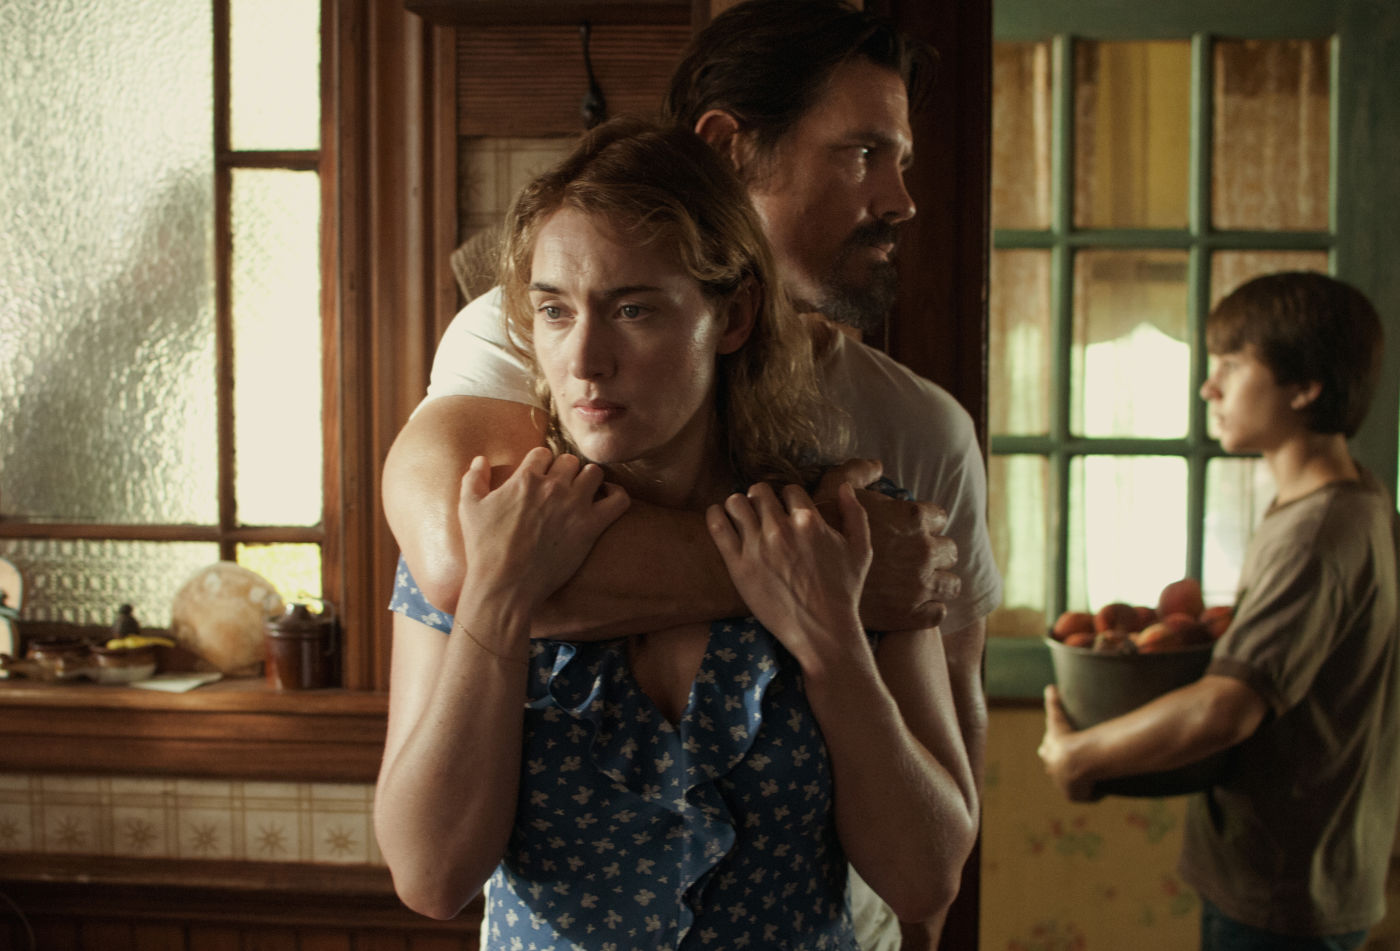 Kate Winslet, Josh Brolin and Gattlin Griffith in Paramount Pictures' Labor Day (2014)